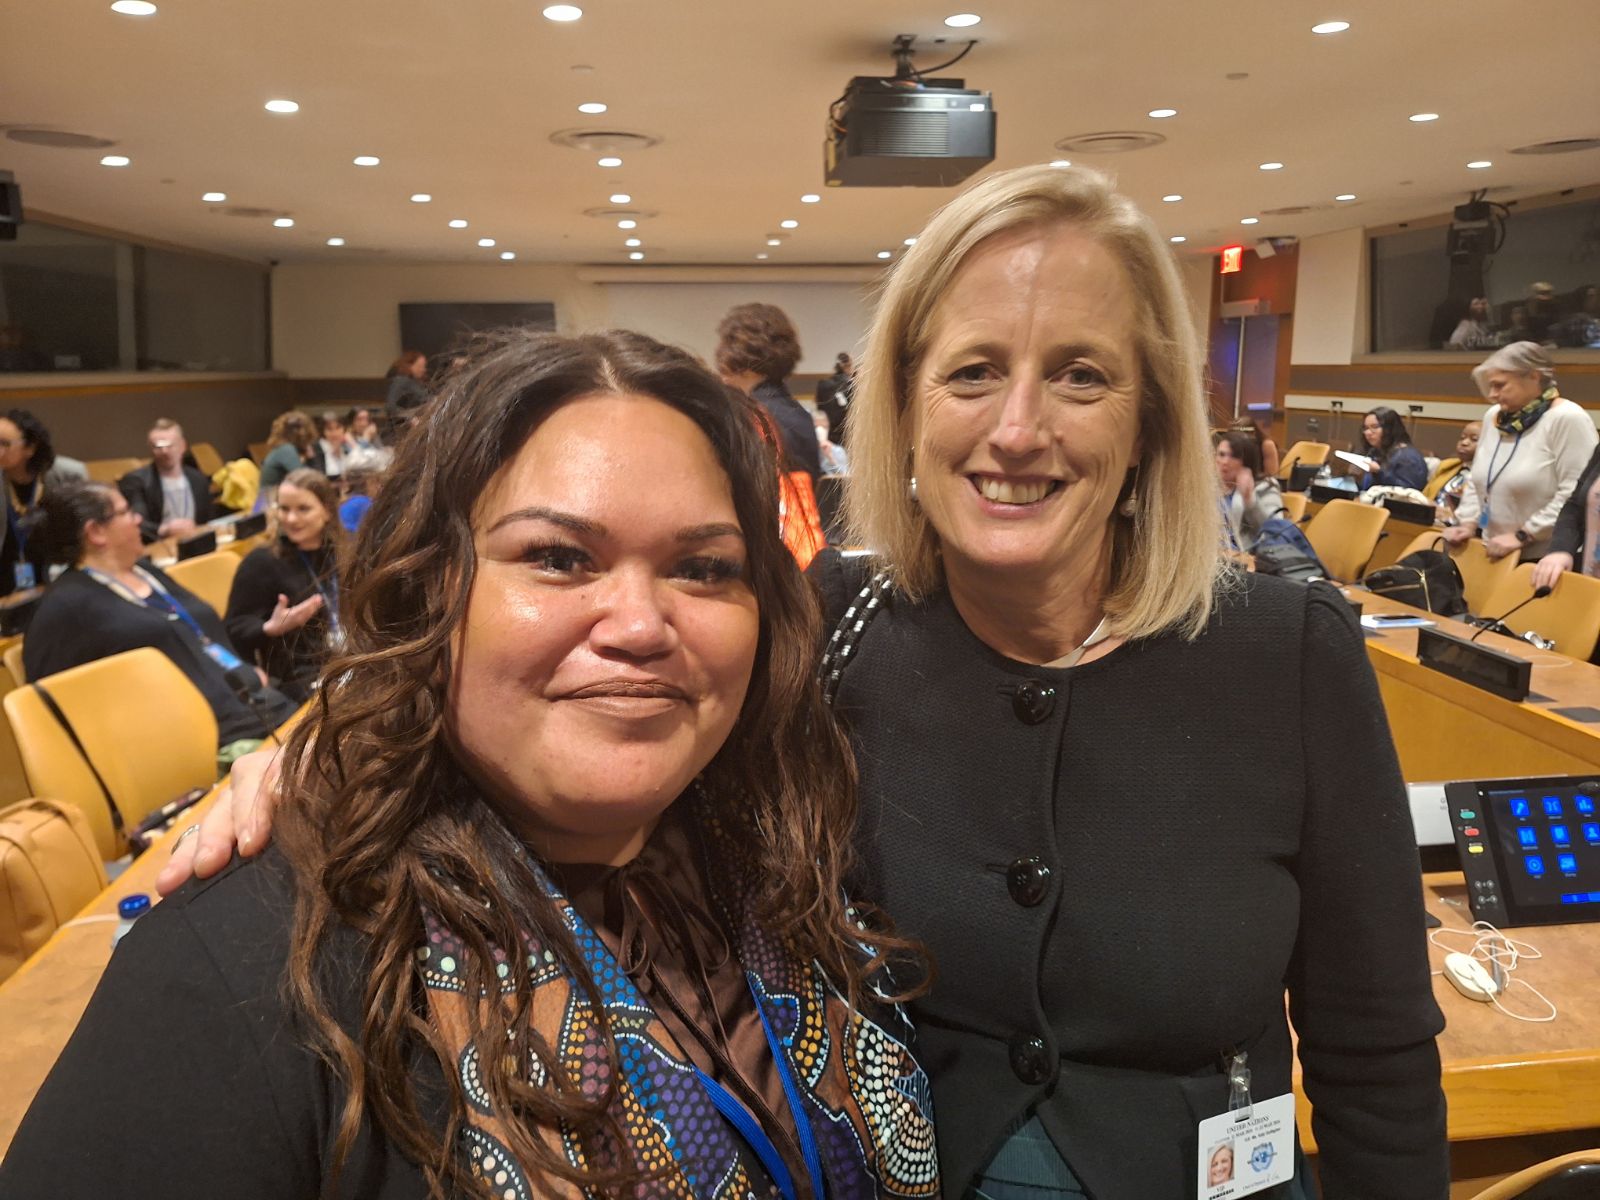 Oneeva and Katy Gallagher at CSW68